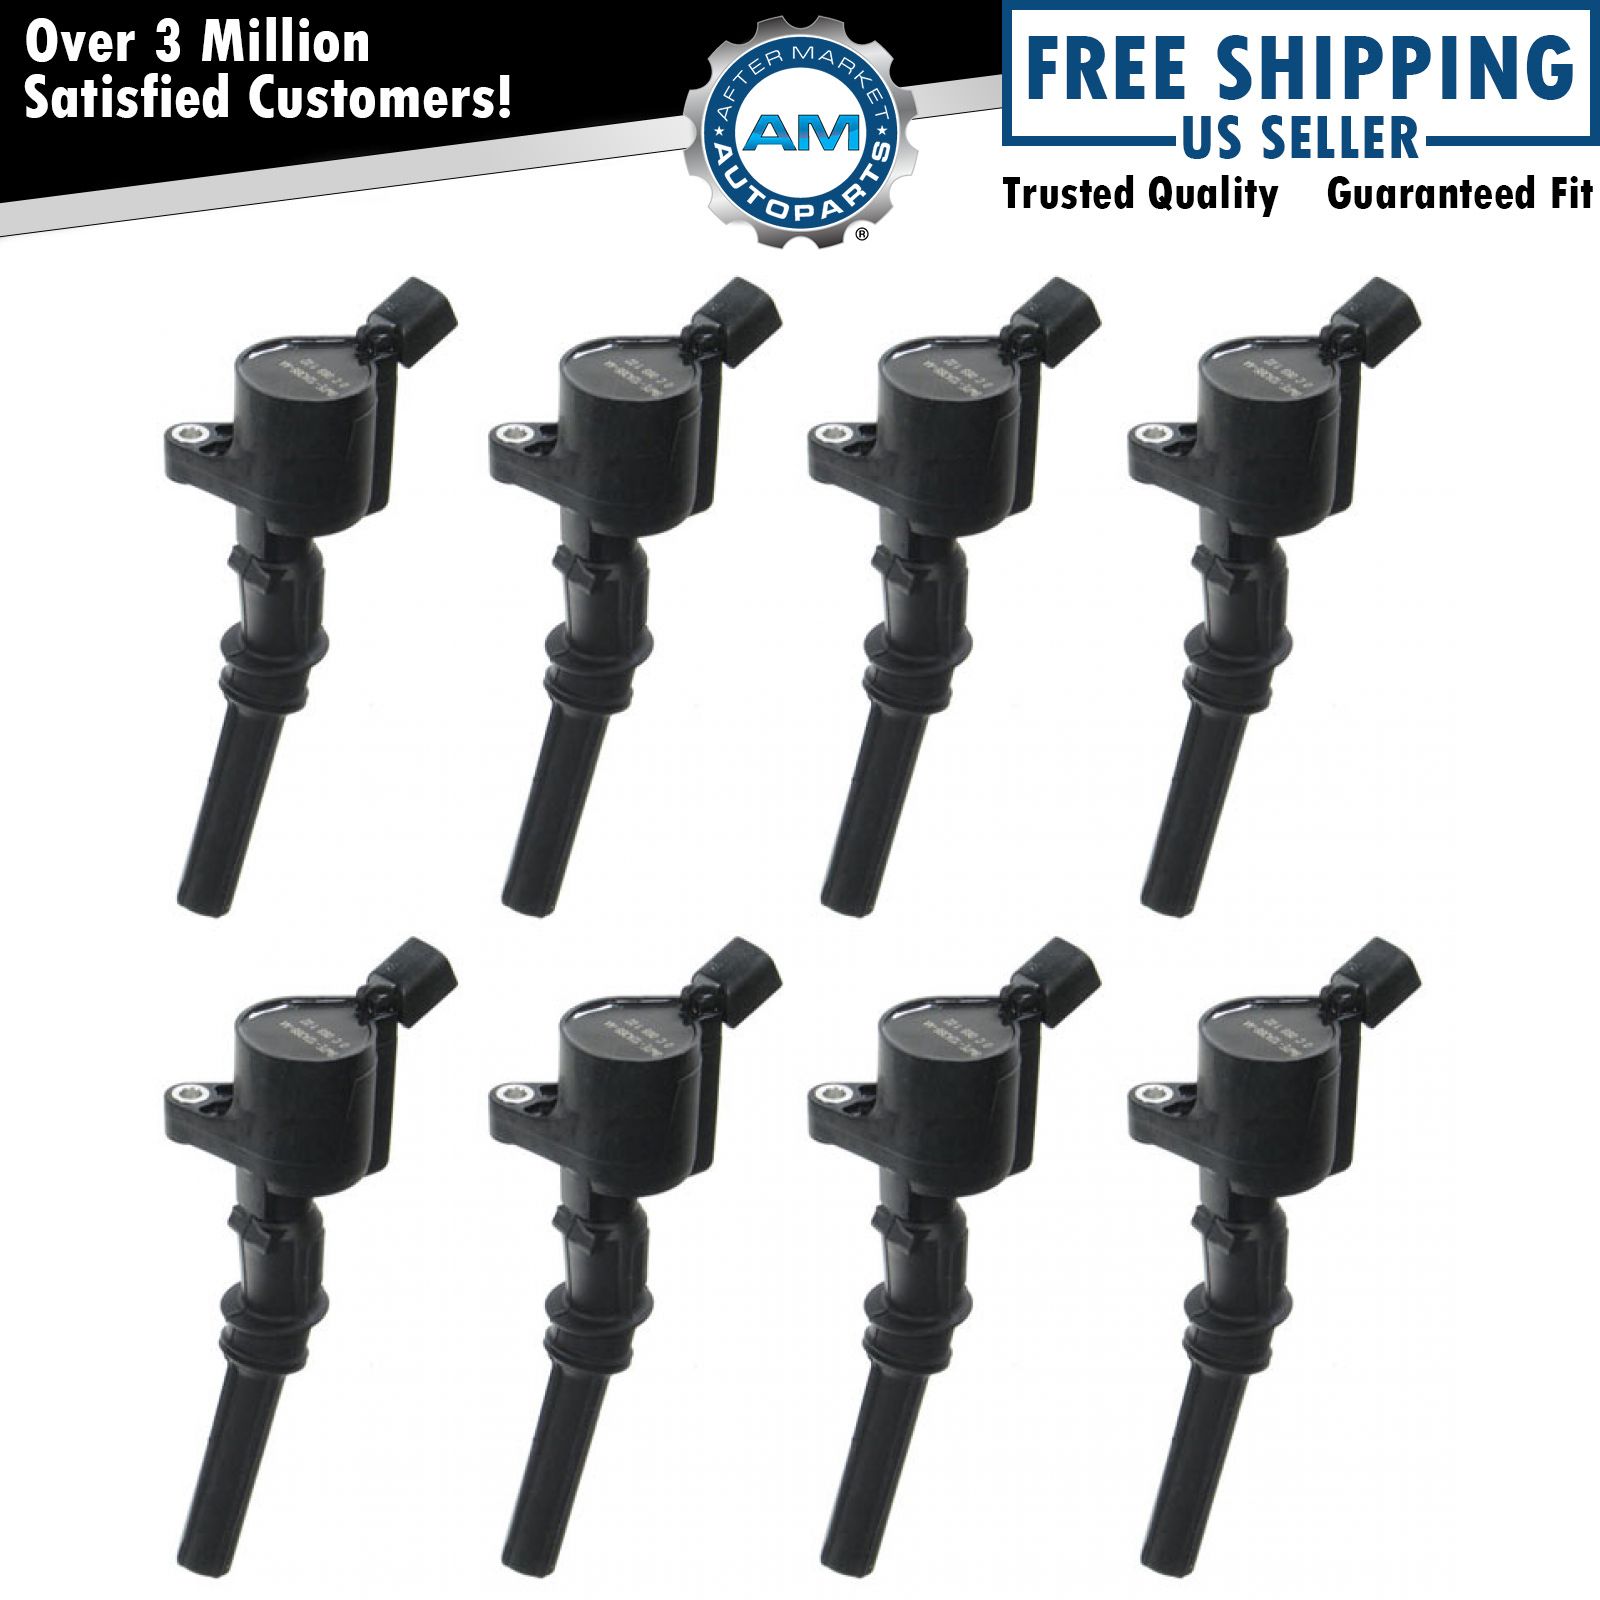 Motorcraft Ignition Coil Kit Set of 8 For Ford Mercury Pickup Truck Van Car